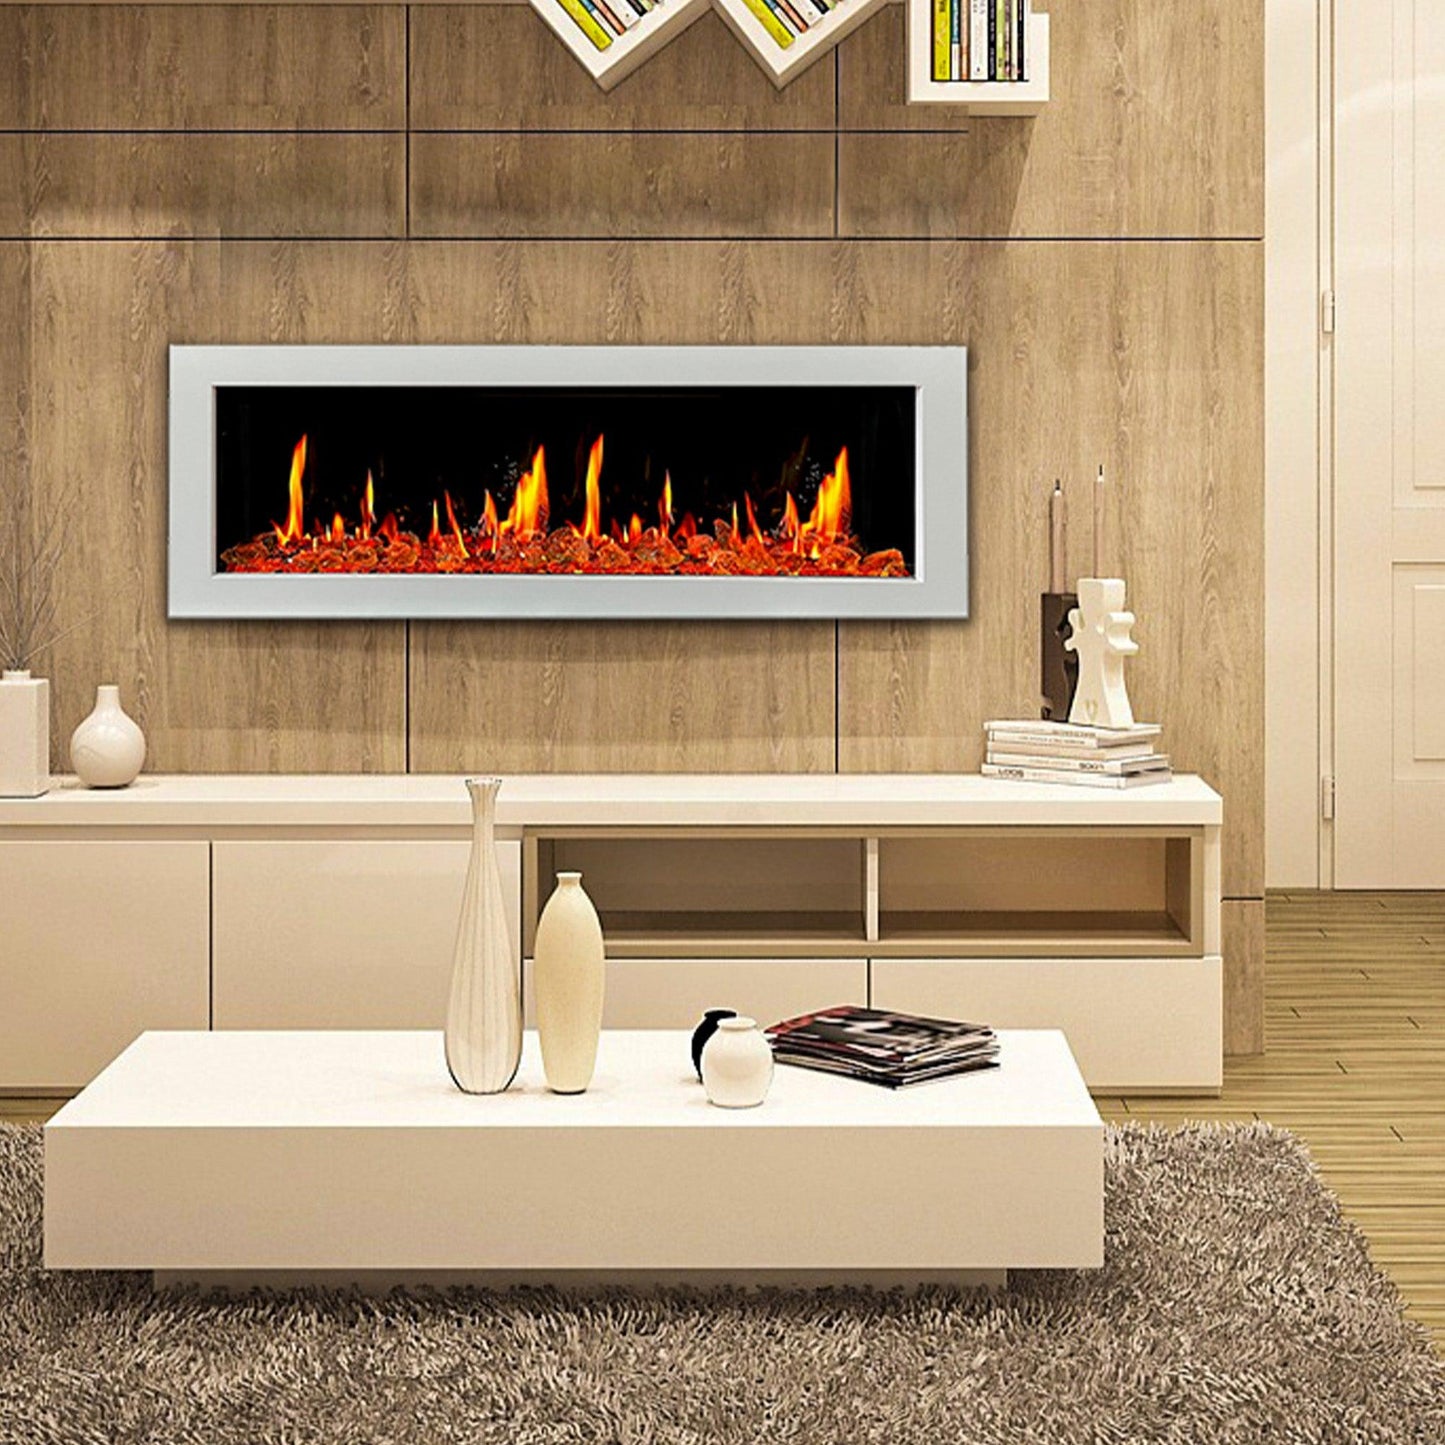 ZopaFlame™ 58" Linear Wall-mount Electric Fireplace - WG19588V - ZopaFlame Fireplaces